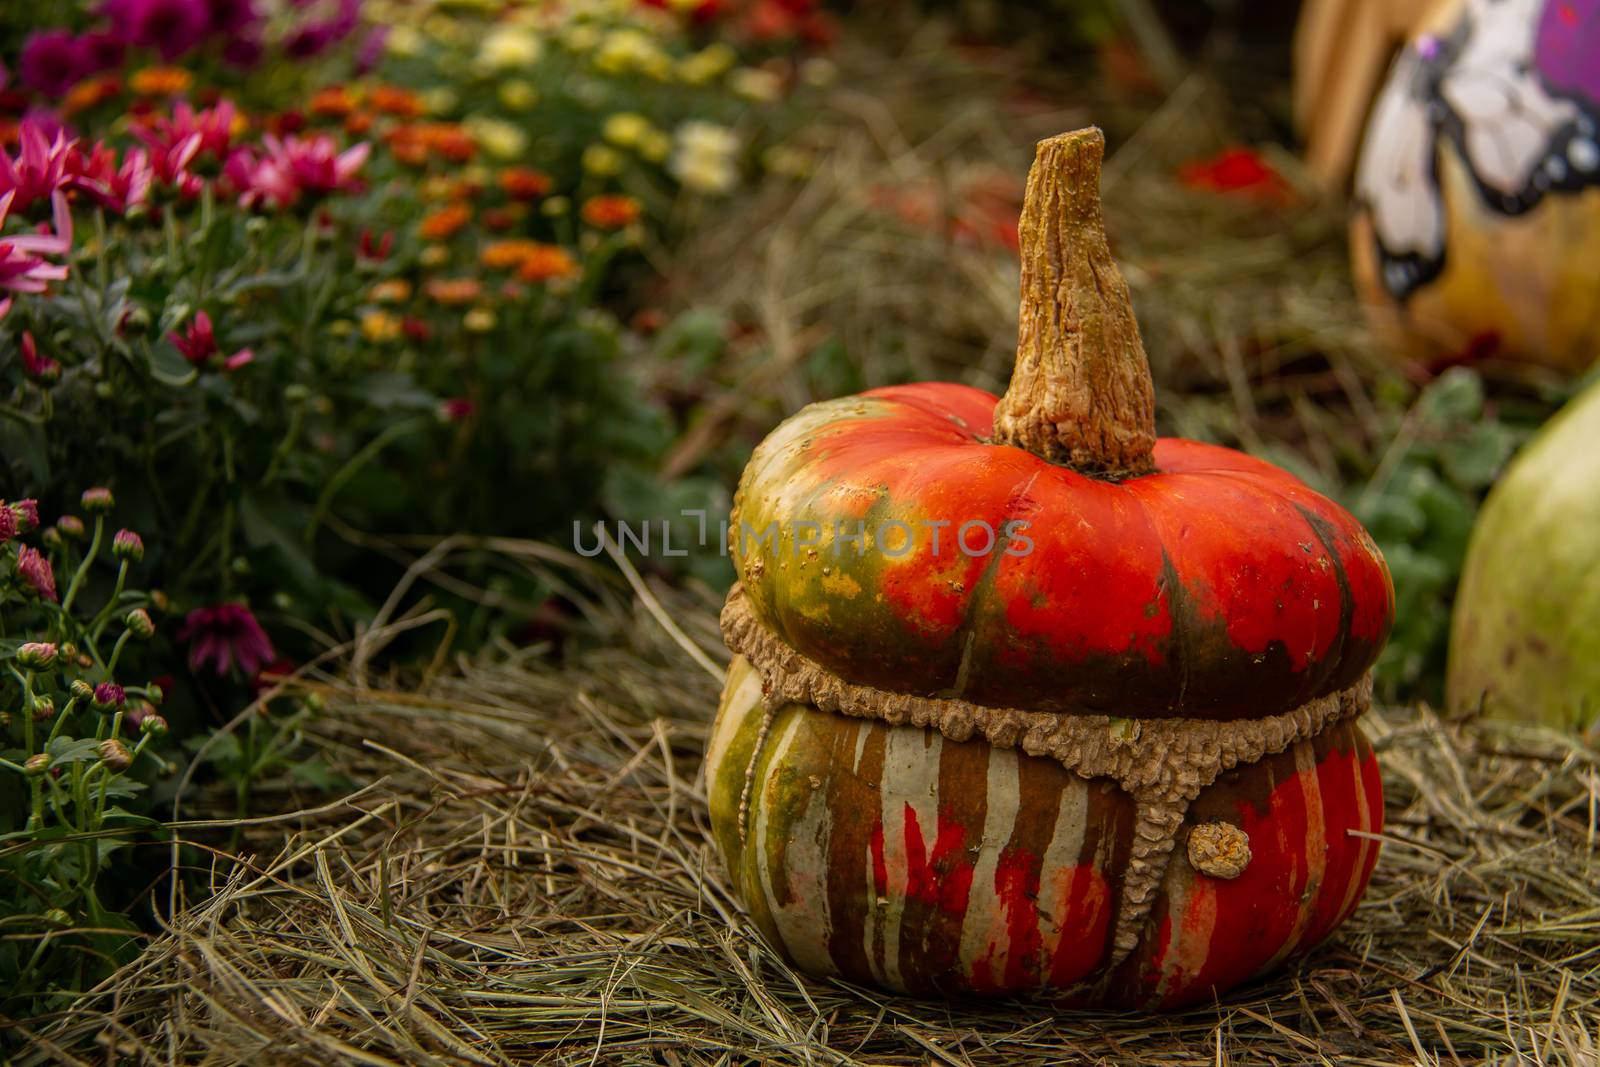 Pumpkin unusual shape and colors suitable to decorate the thanksgiving holiday